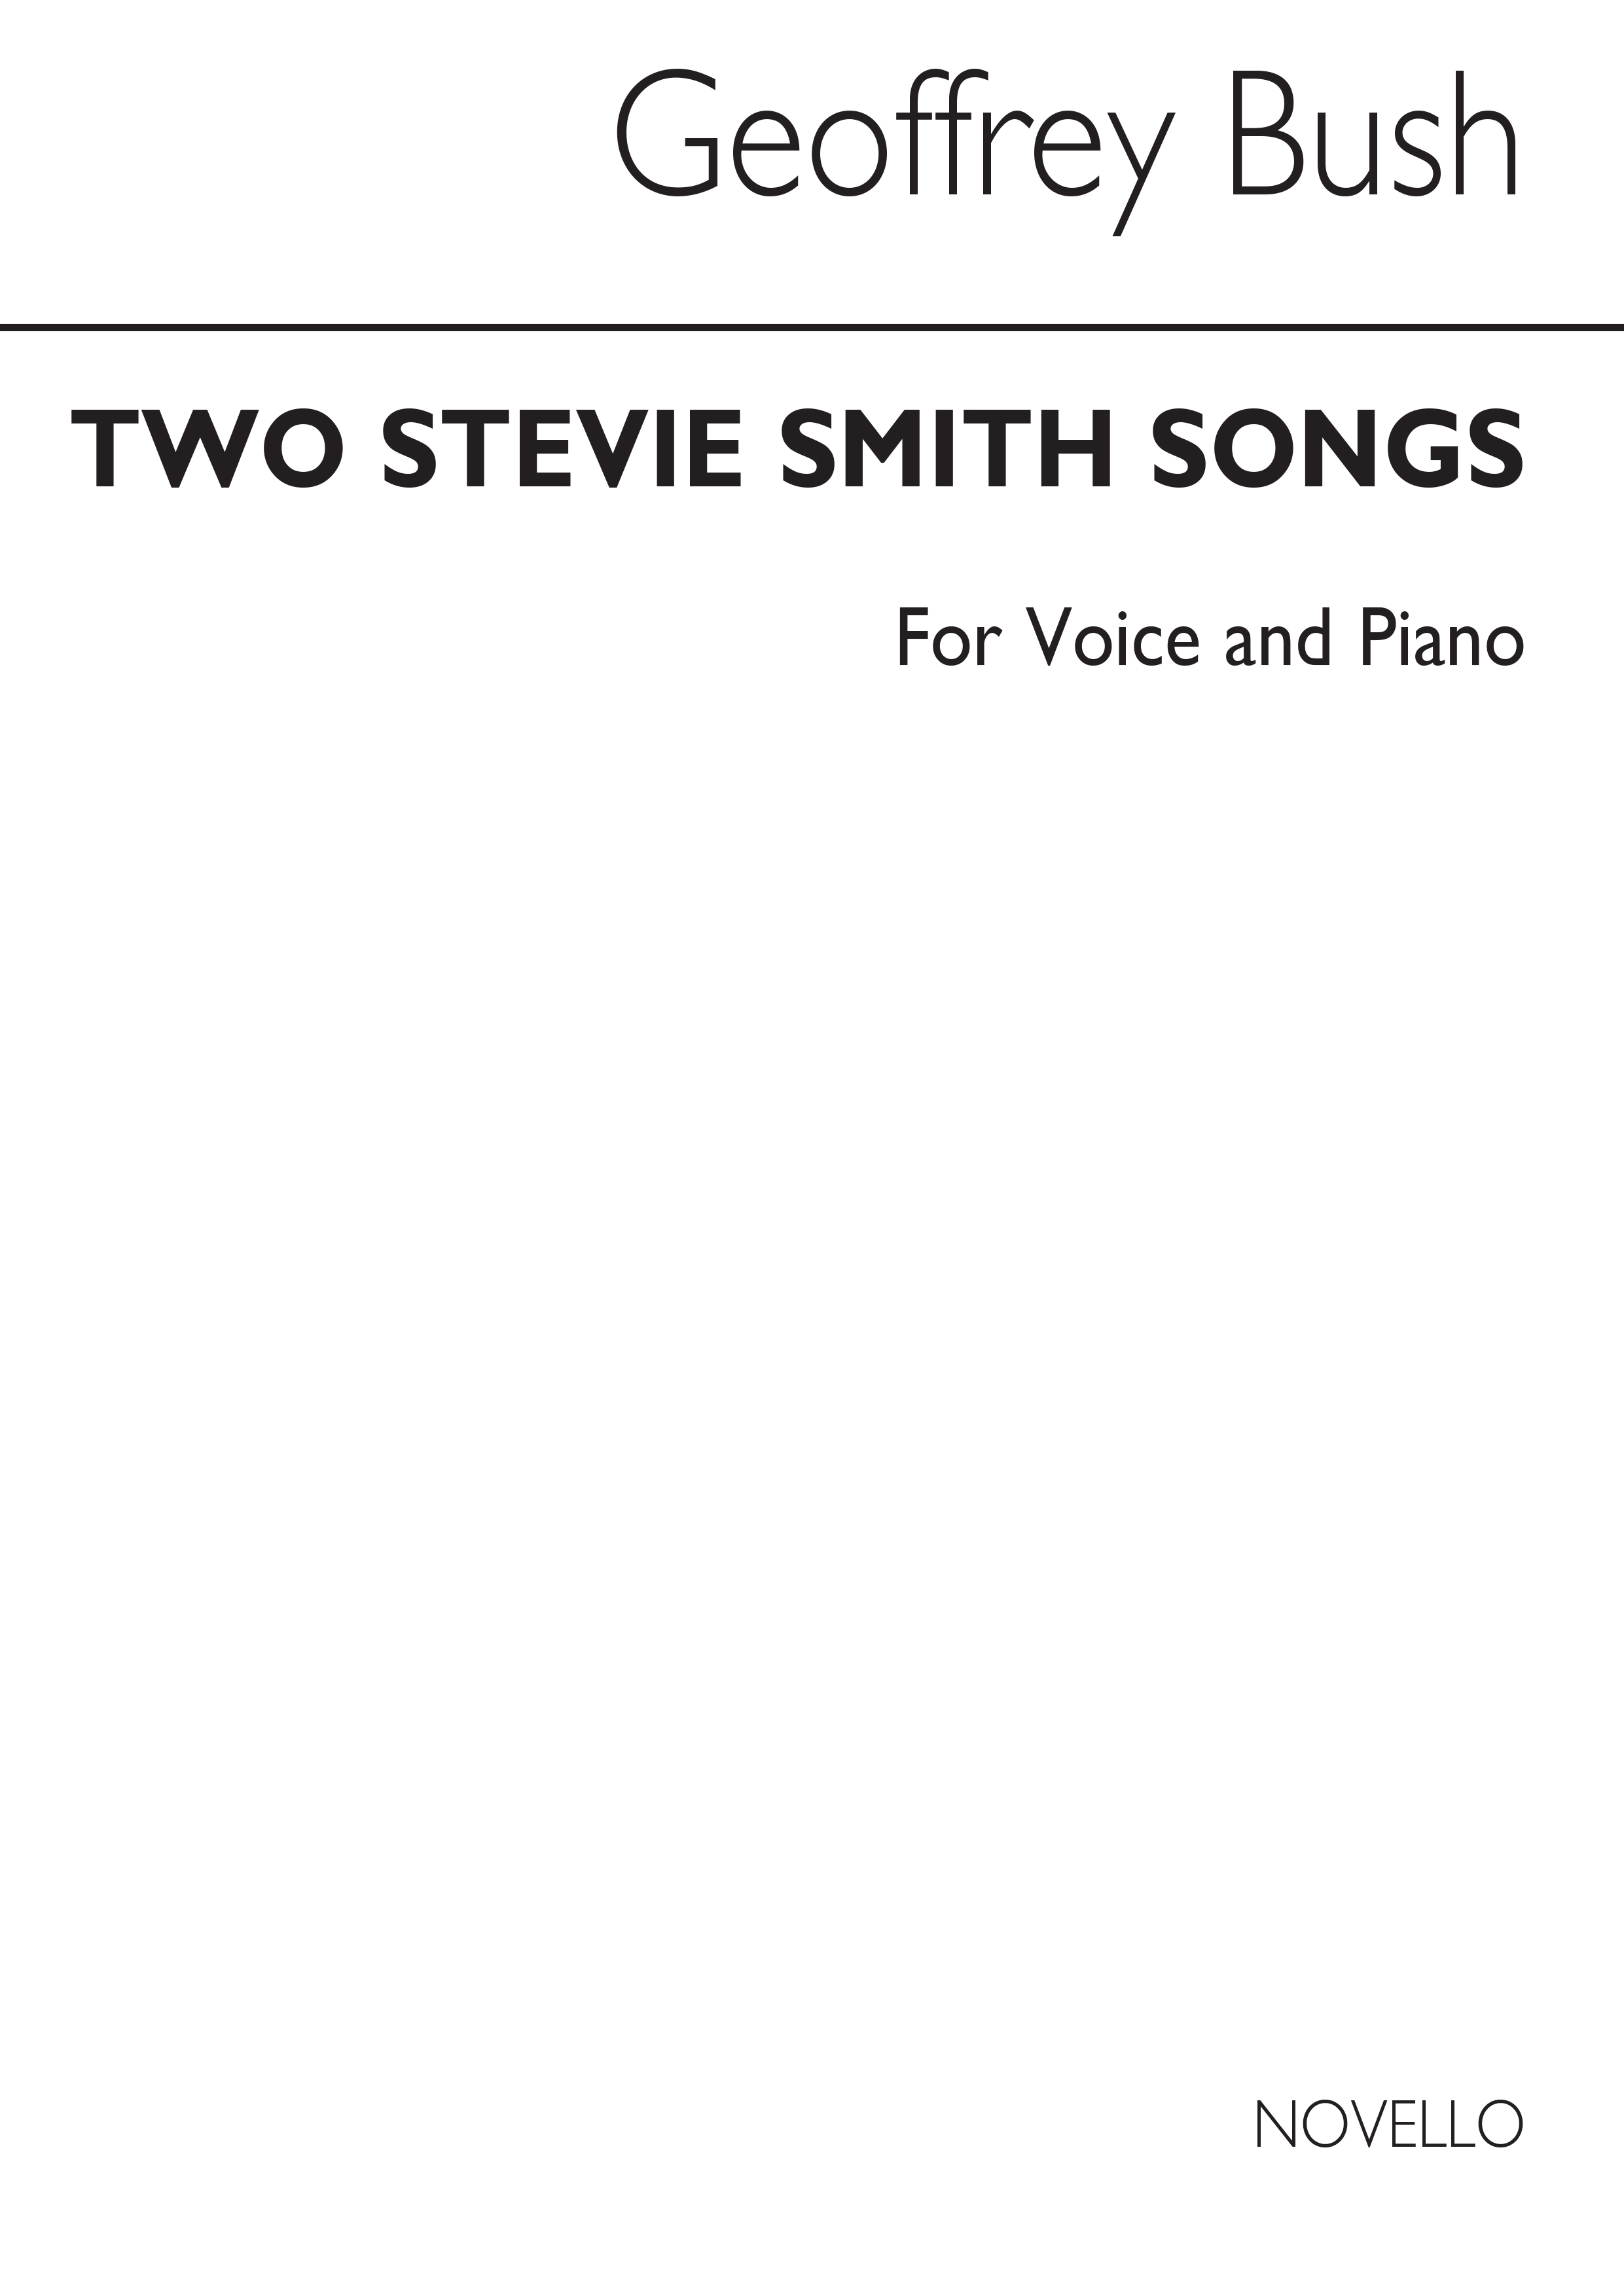 Geoffrey Bush: Two Stevie Smith Songs for Tenor and Piano